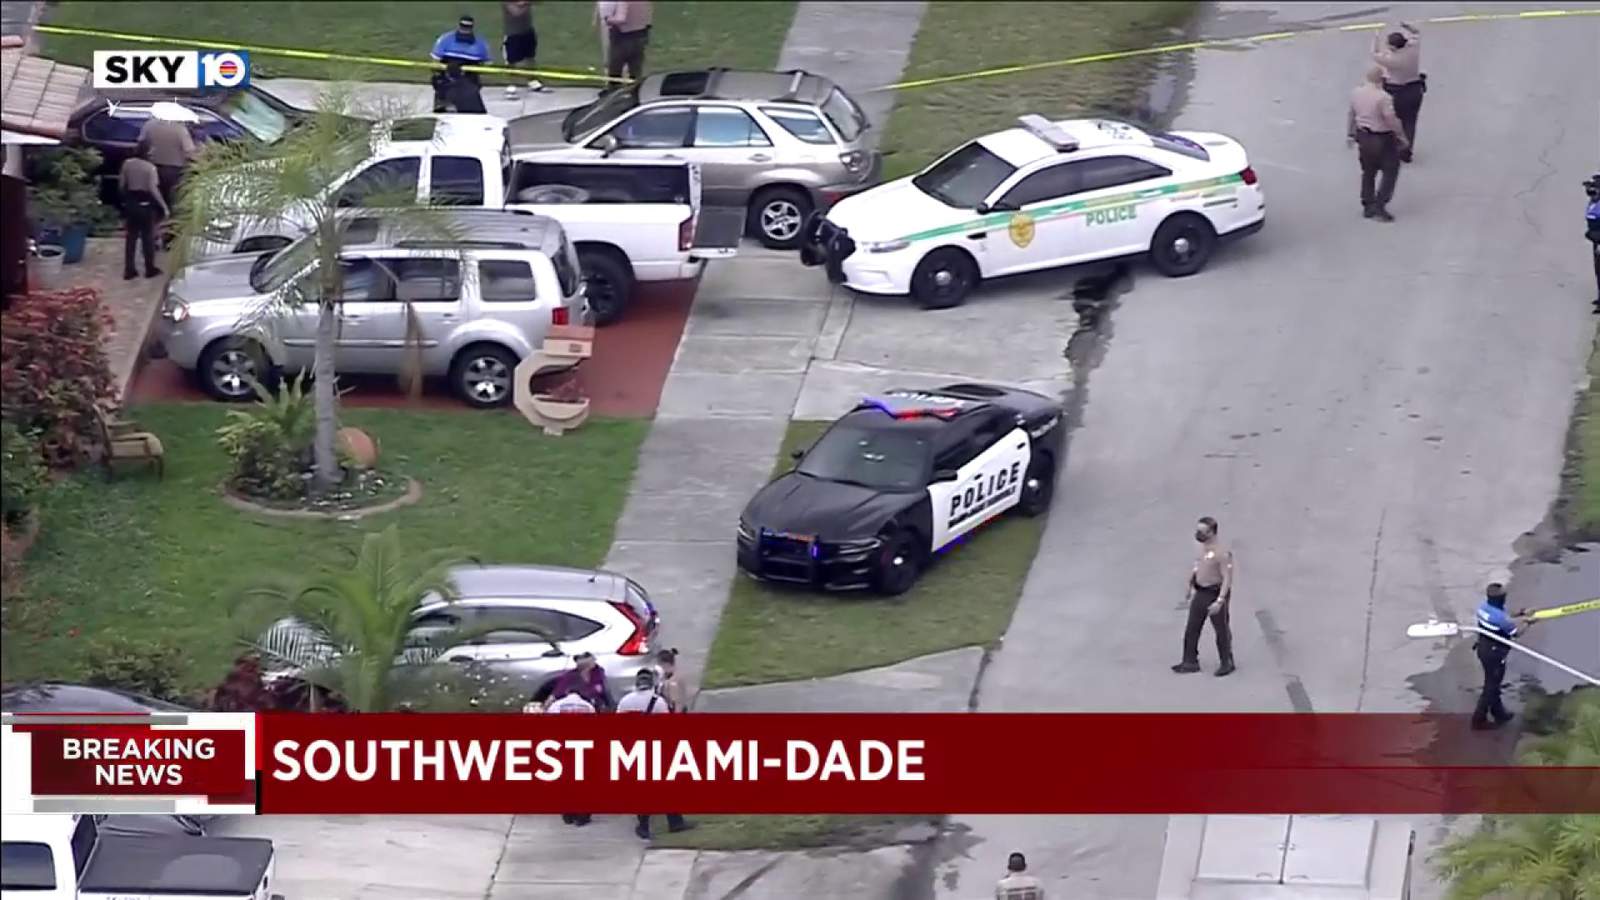 17-year-old boy injured in shooting in Miami-Dade County